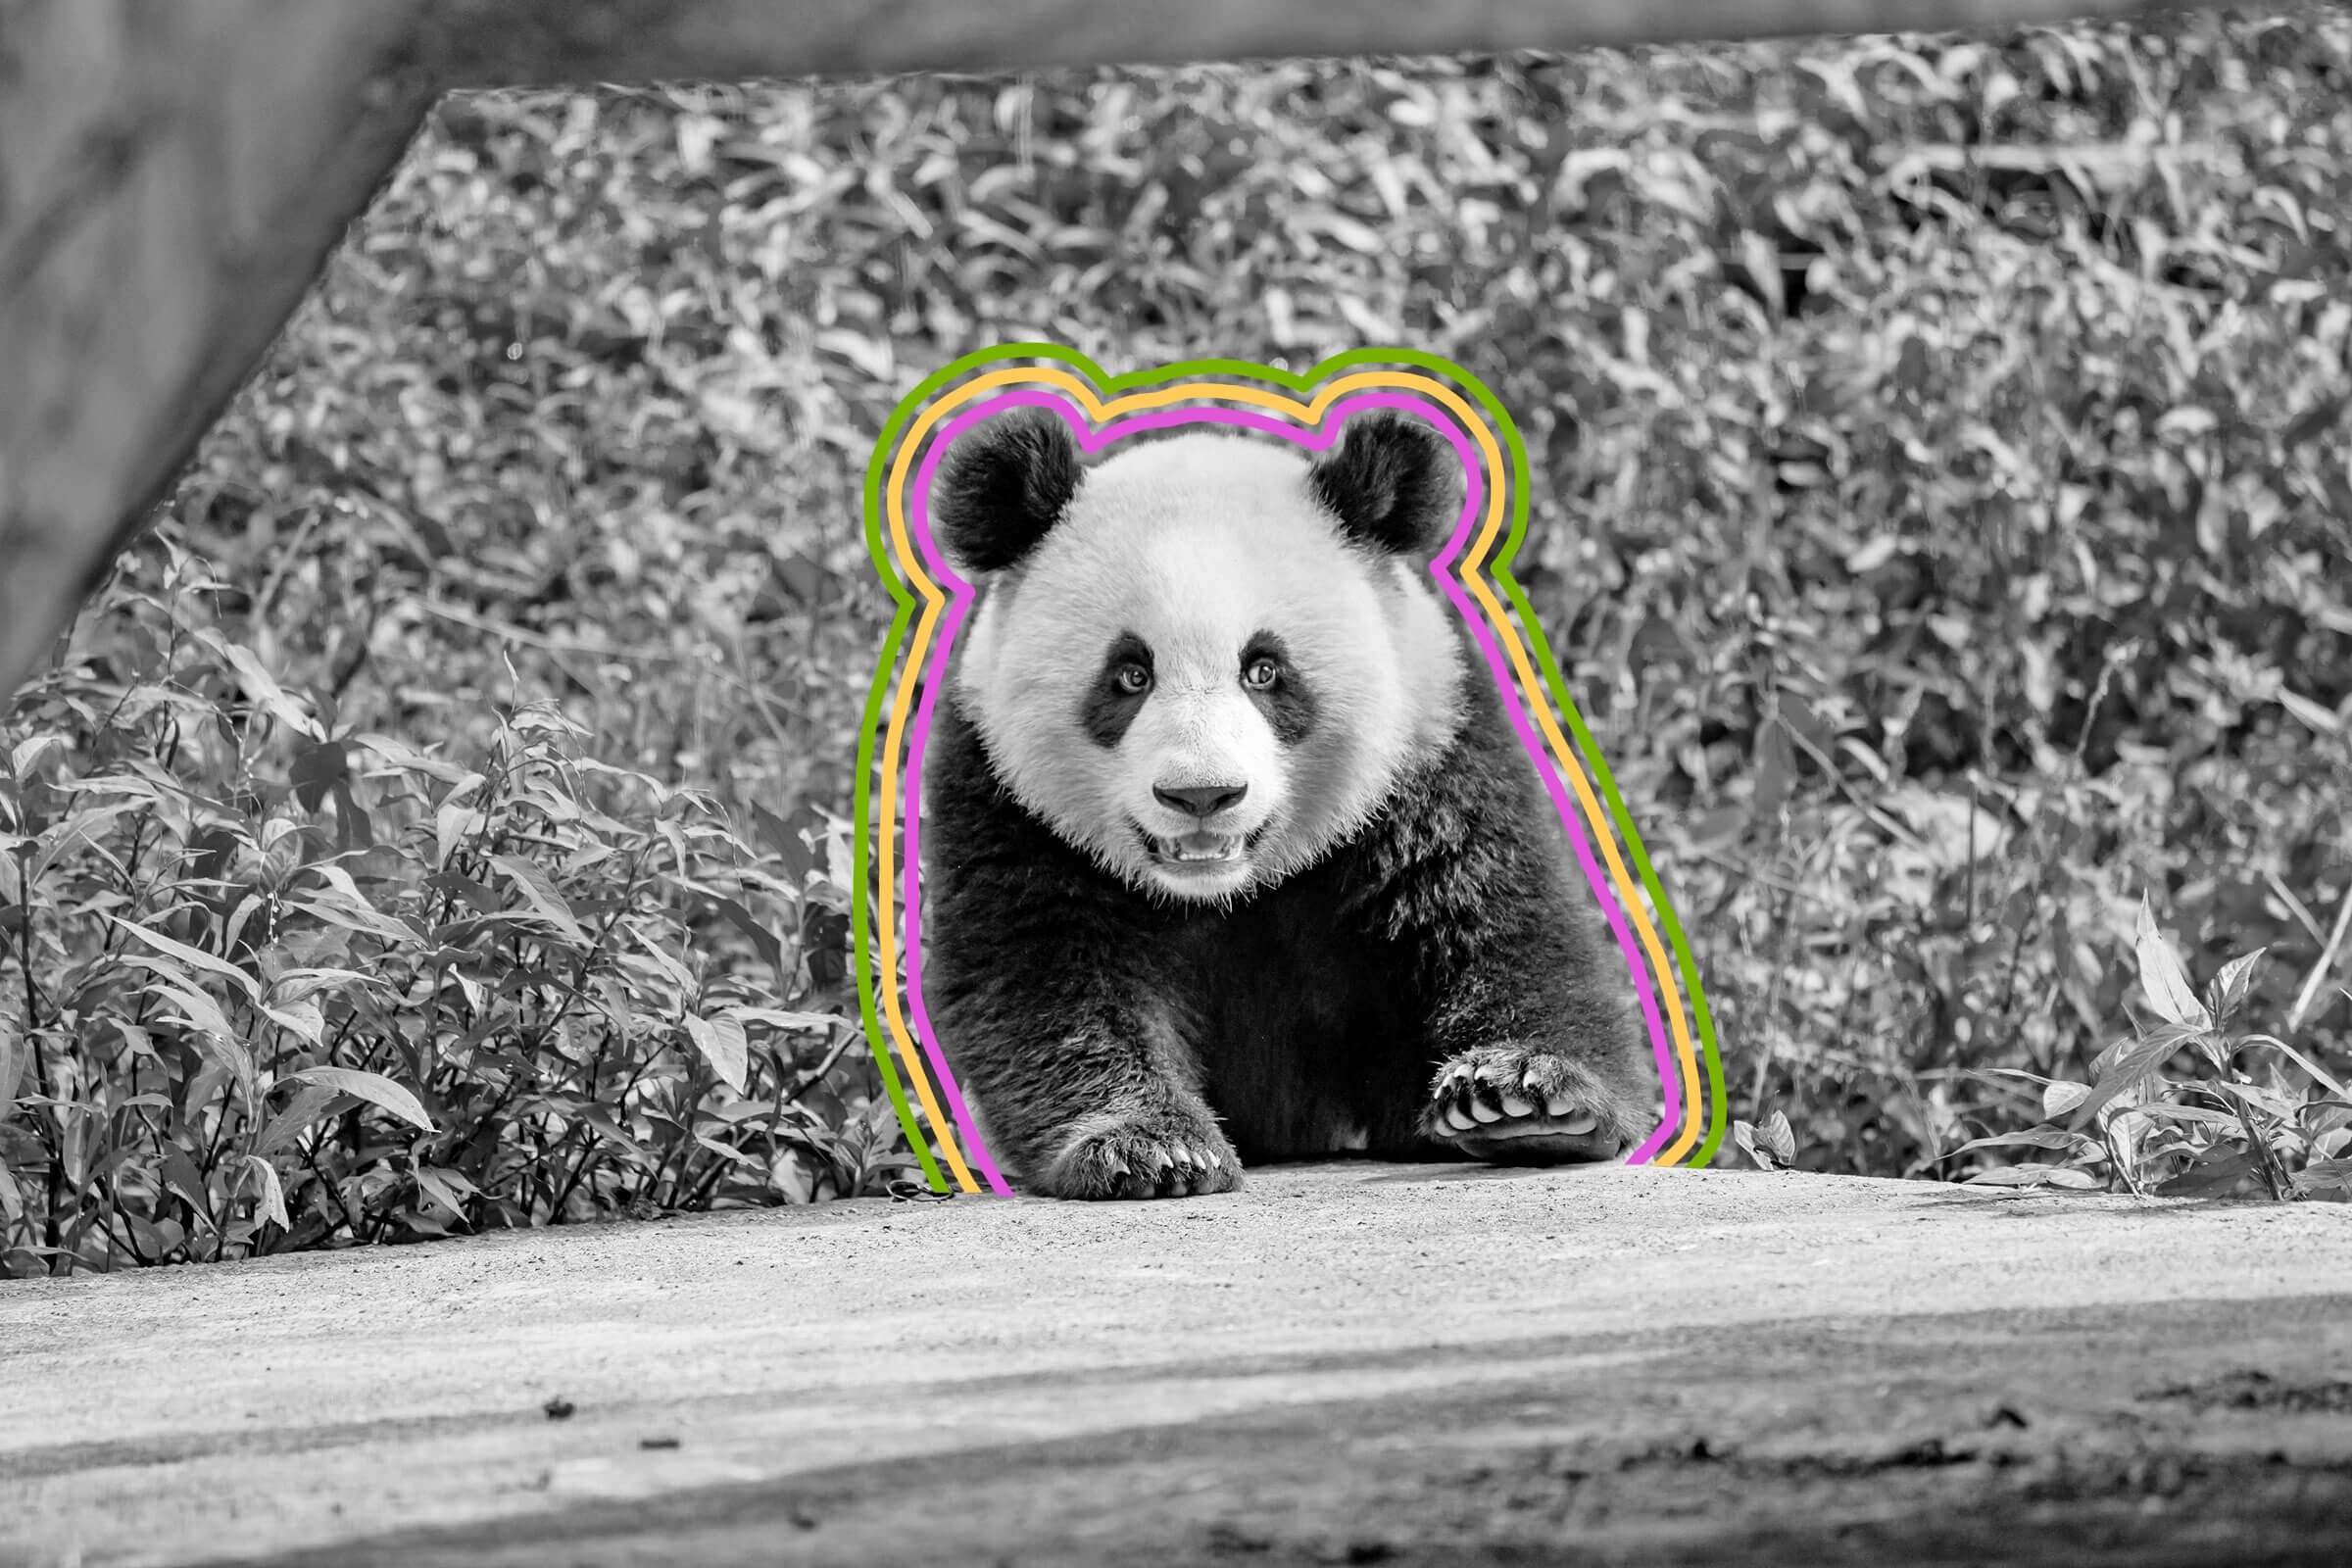 Giant panda guide: why they're threatened, how they raise young